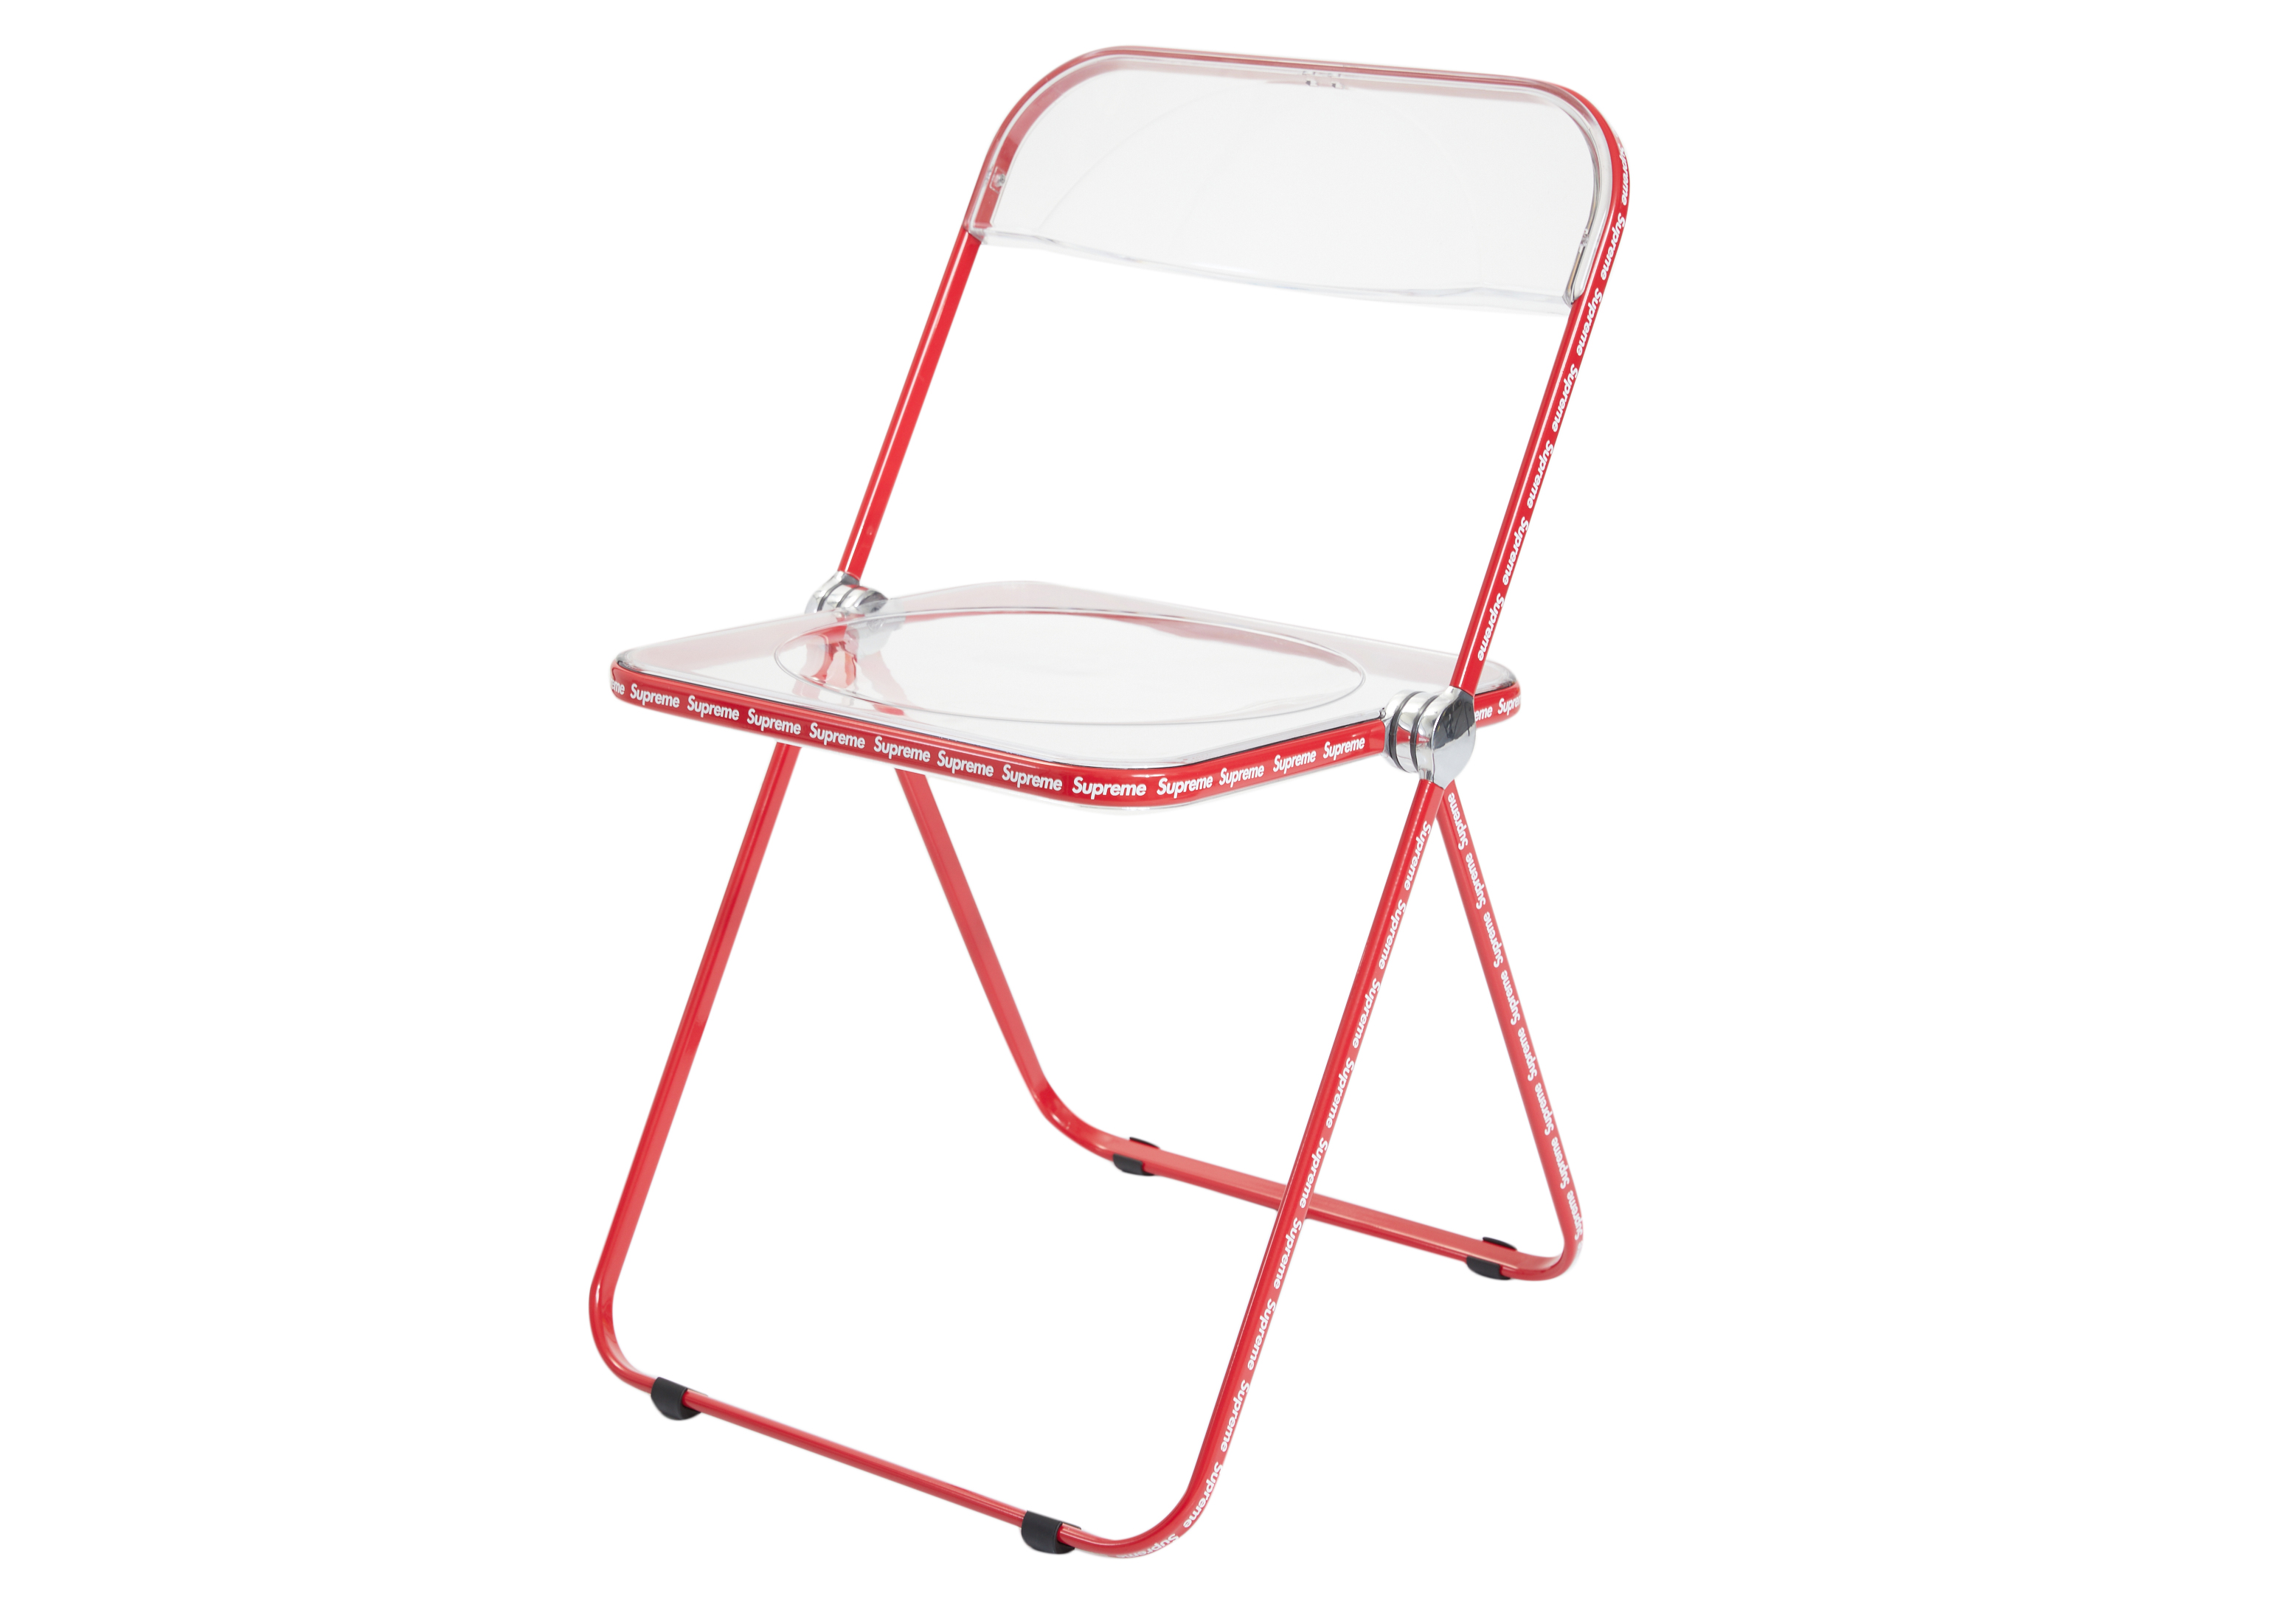 Supreme Metal Folding Chair Red - FW20 - US